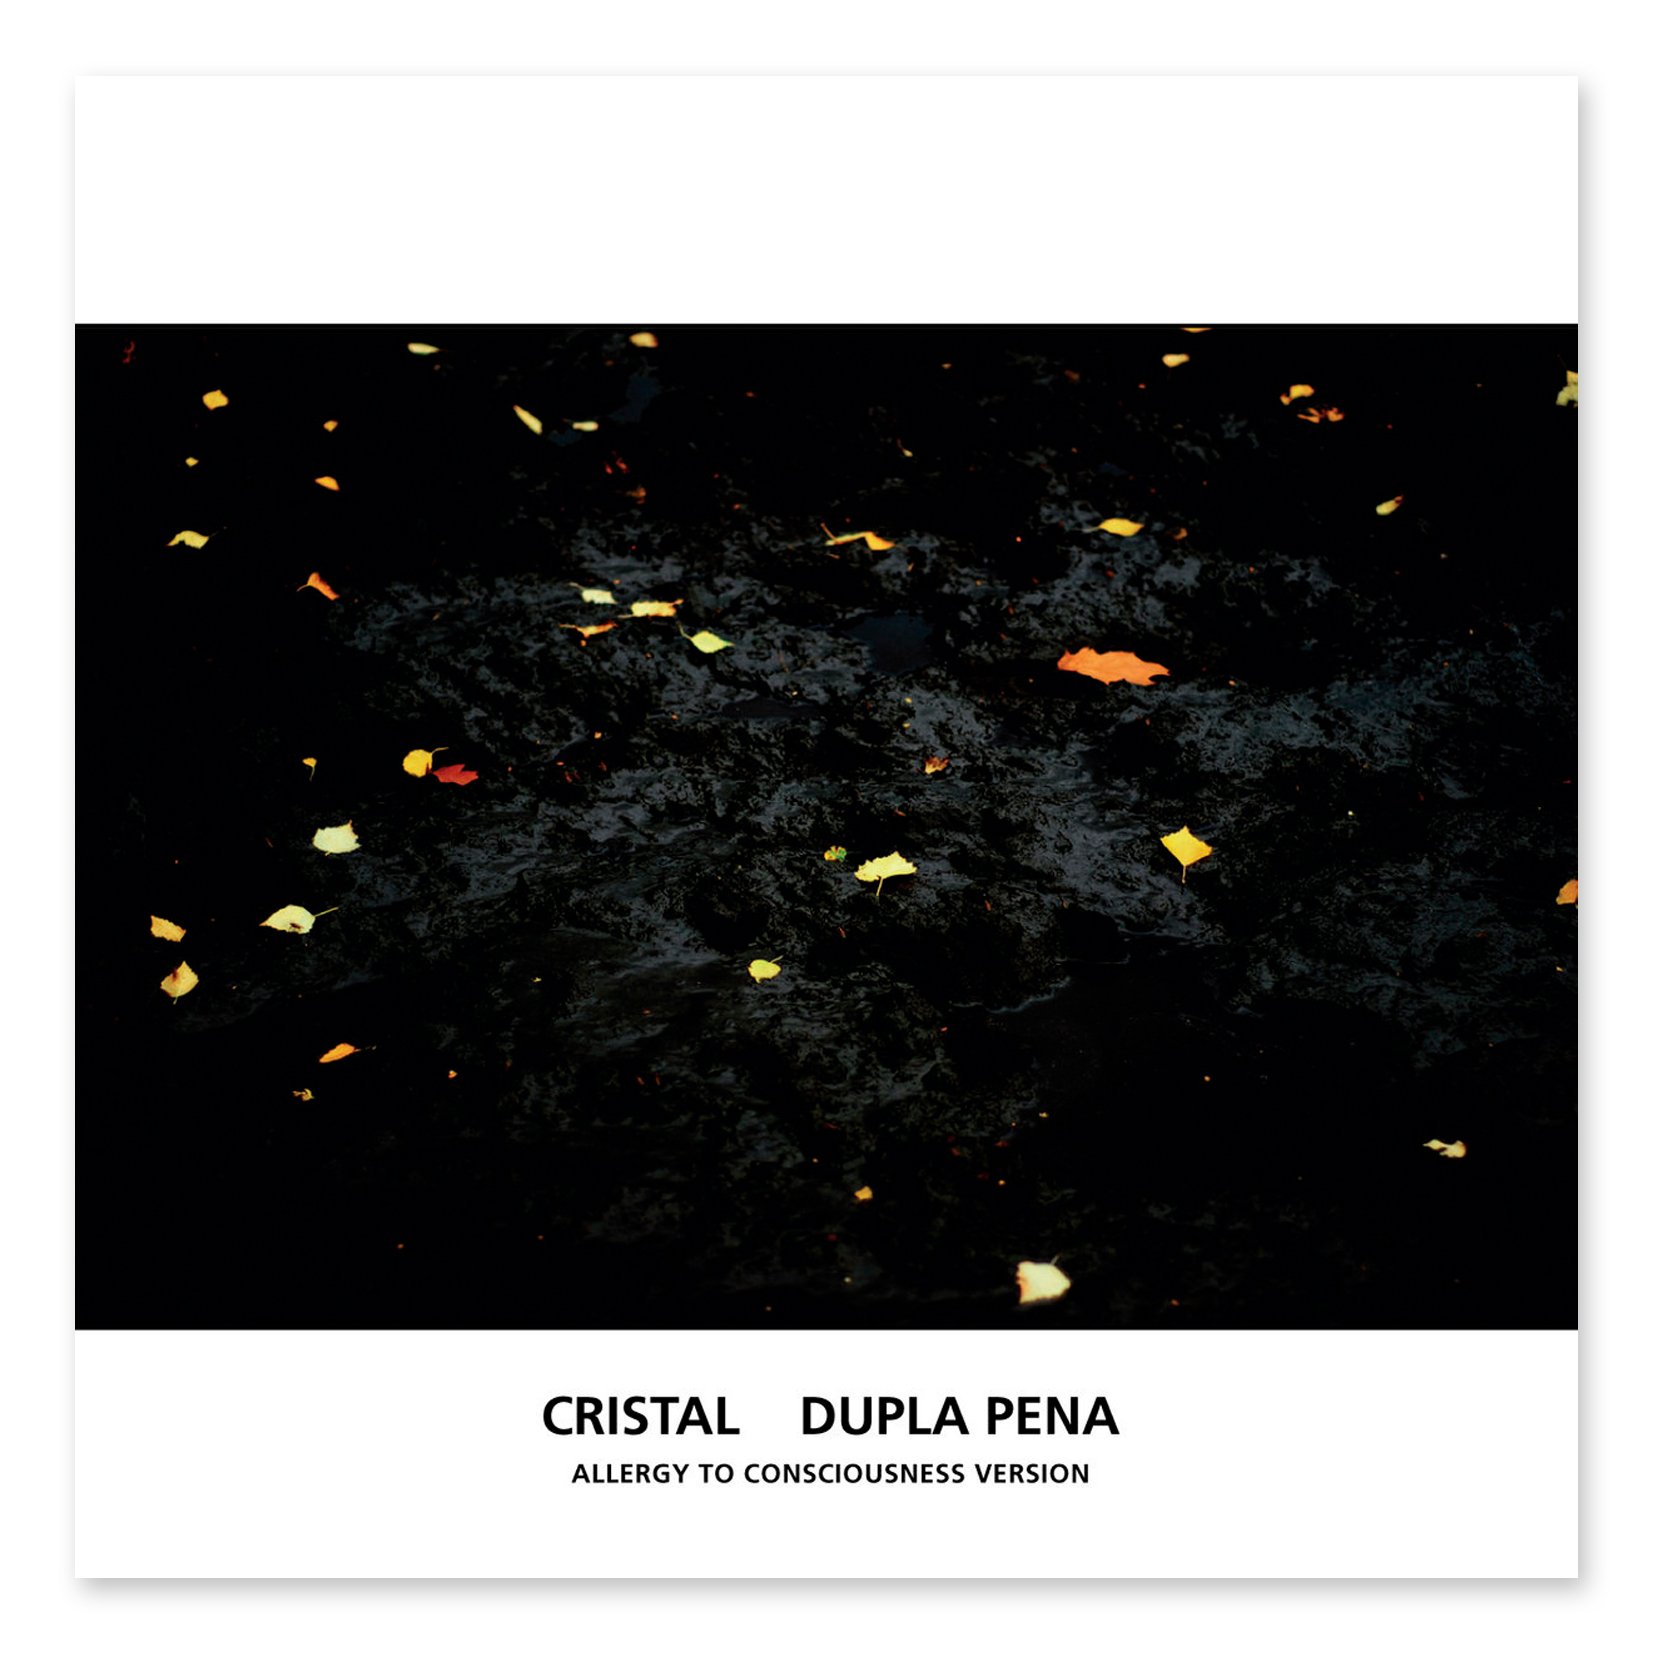 Dupla Pena (Allergy To Consciousness Version) by Cristal.jpg